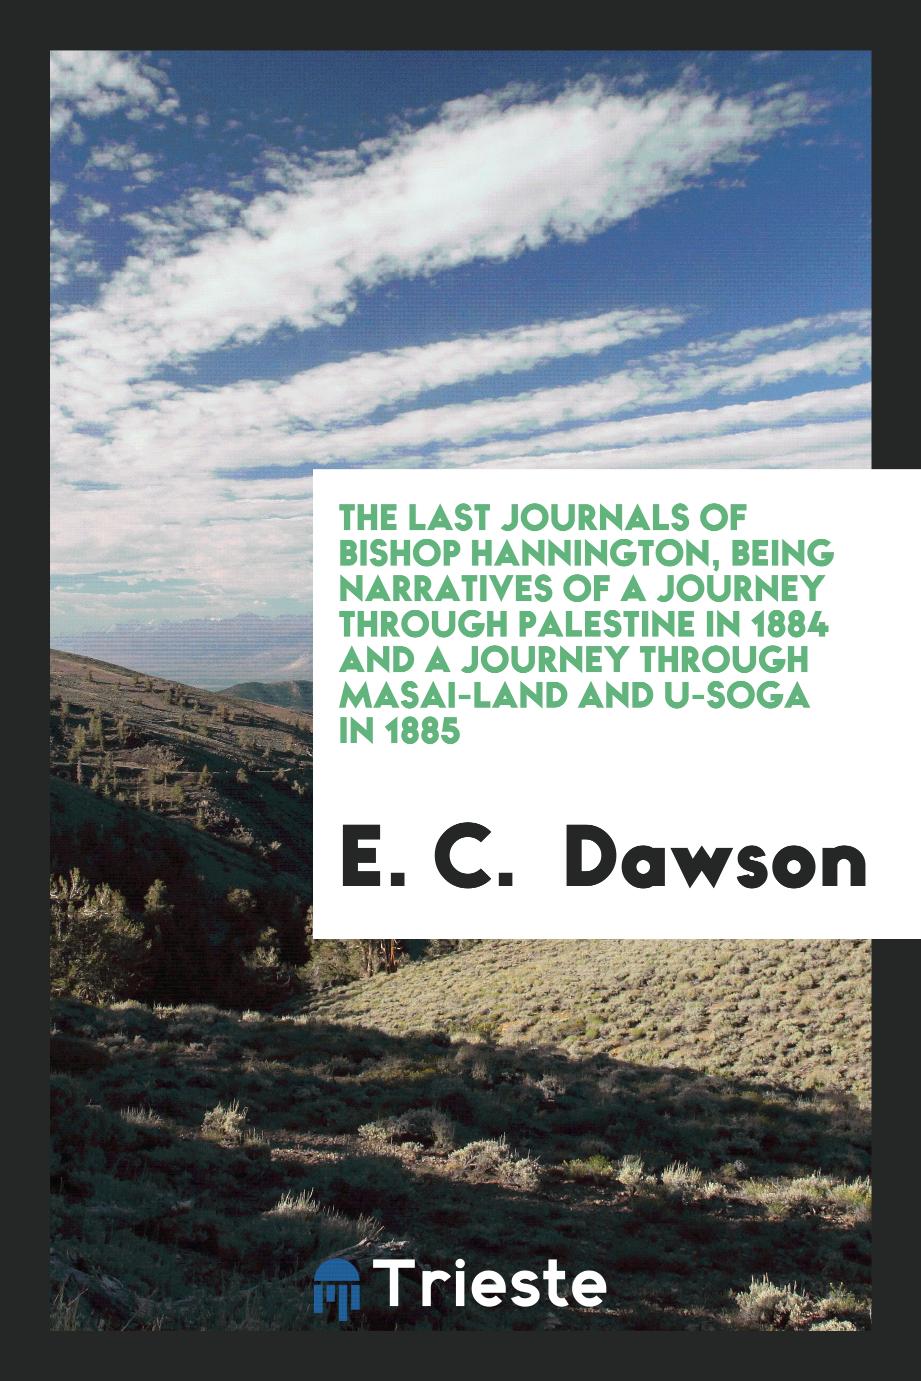 The last journals of Bishop Hannington, being narratives of a journey through Palestine in 1884 and a journey through Masai-land and U-Soga in 1885